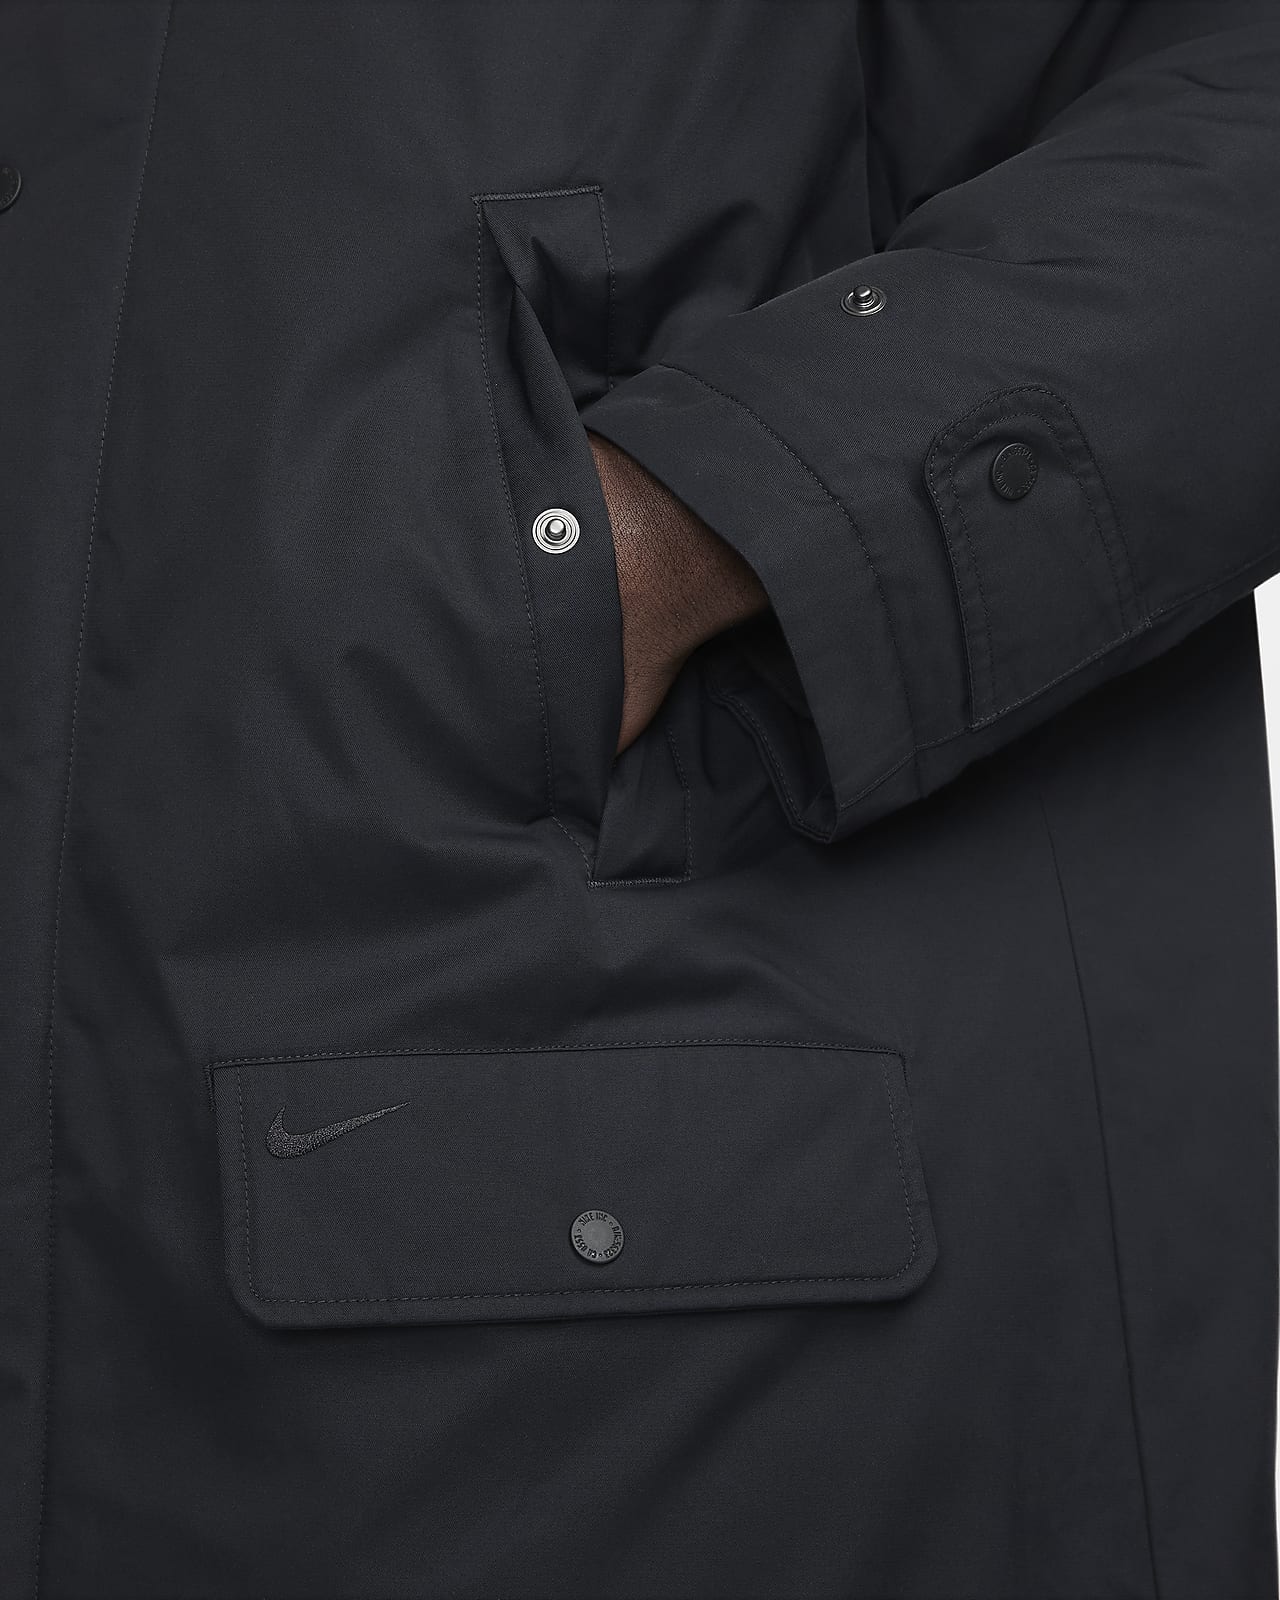 Nike Life Men's Insulated Parka.